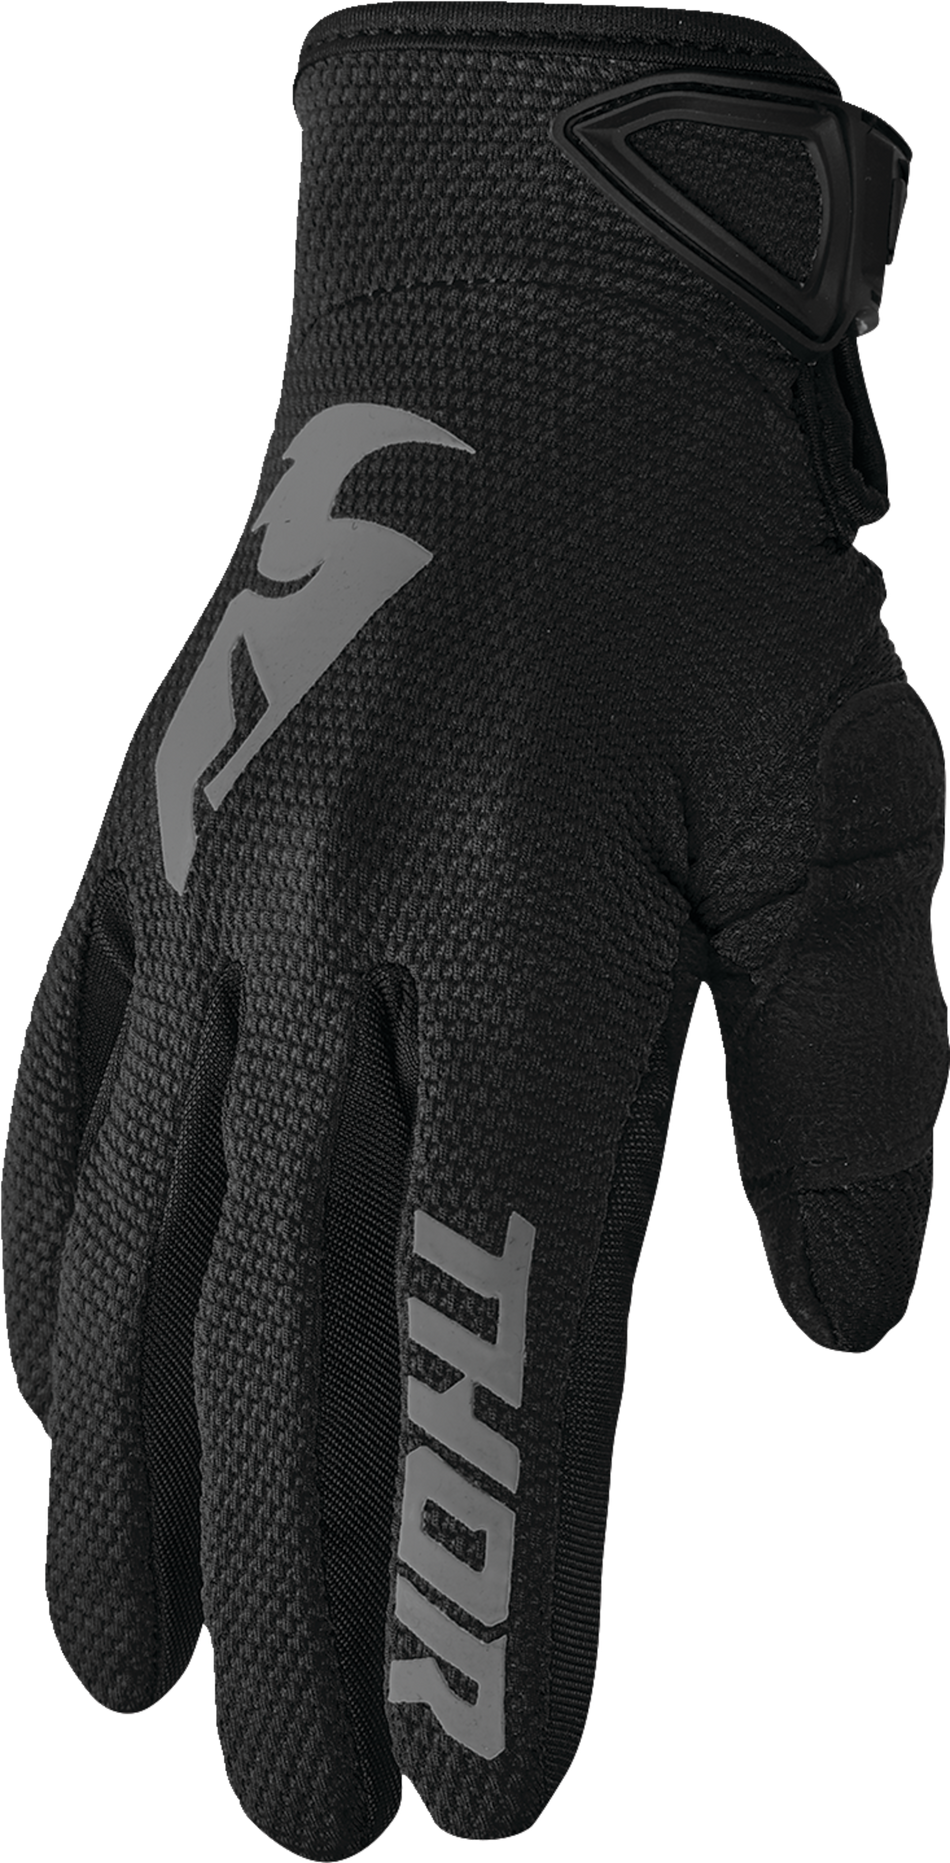 THOR Sector Gloves - Black/Gray - XL 3330-7253